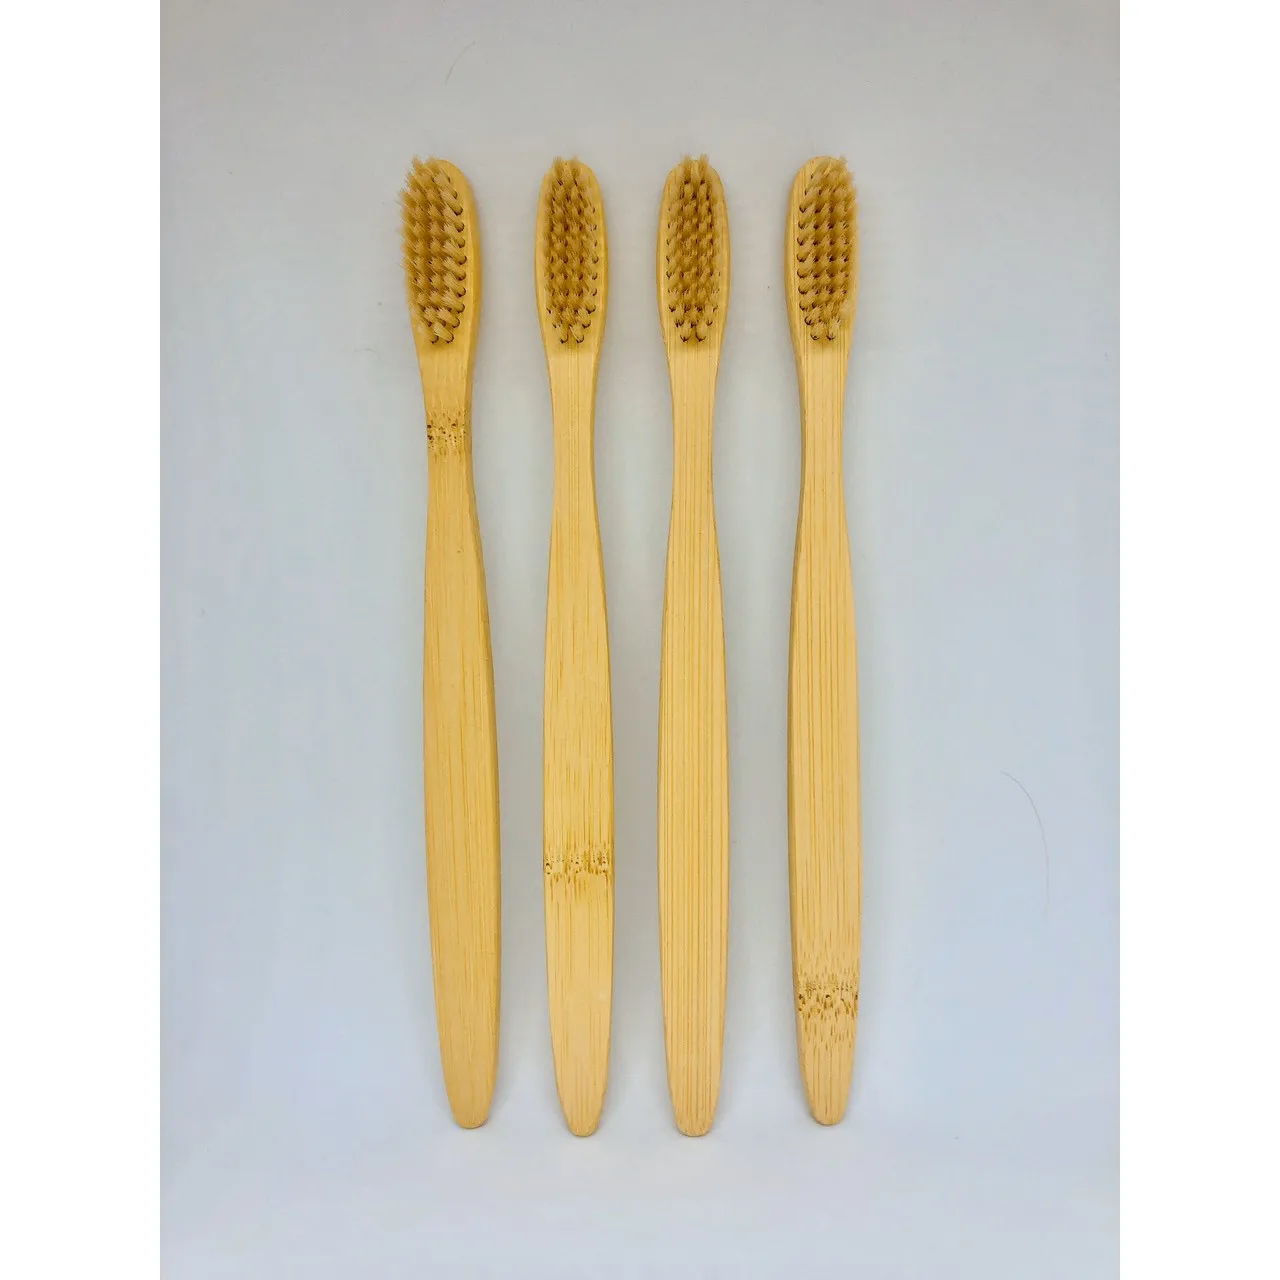 SAFIMEX BAMBOO TOOTHBRUSH HIGH QUALITY ECO FRIENDLY NATURAL FIBER BRISTAL FROM VIETNAM 2021